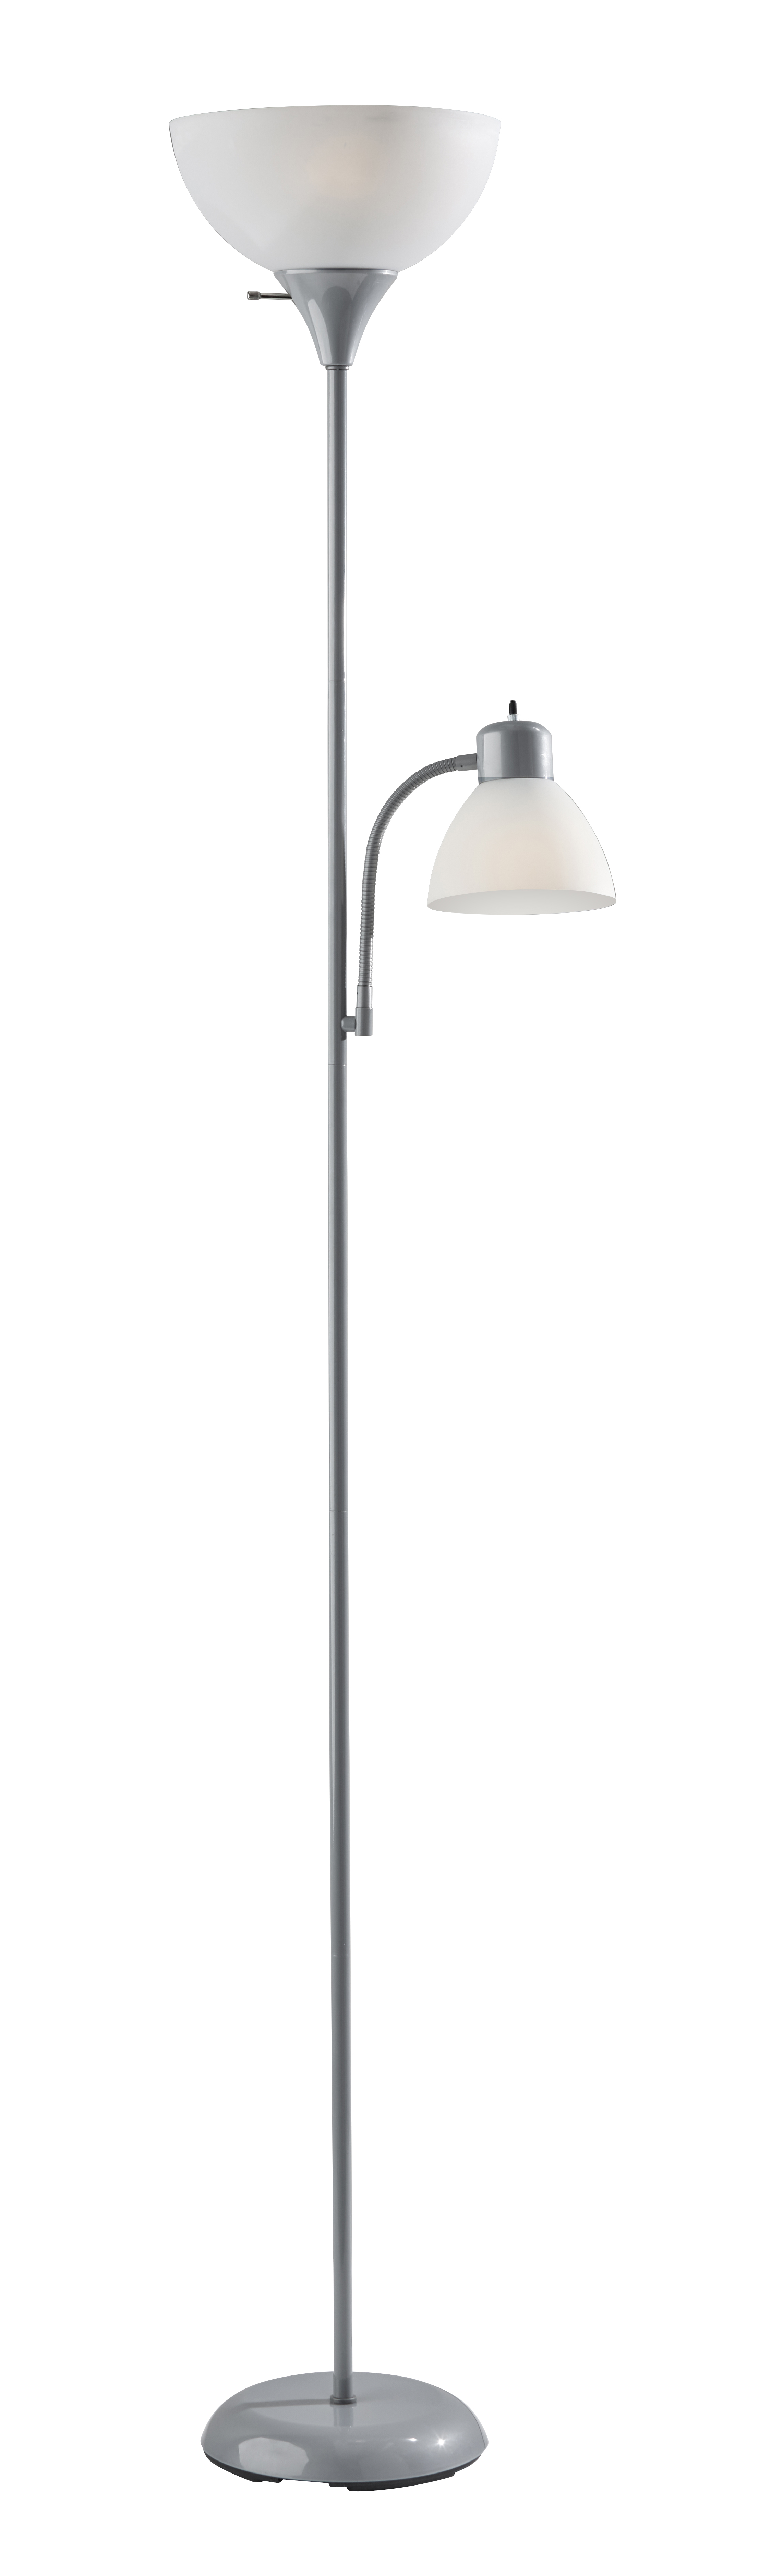 Mainstays 72'' Combo Floor Lamp & Reading Lamp, Silver, Plastic, Modern, For Home and Office Use - image 1 of 7